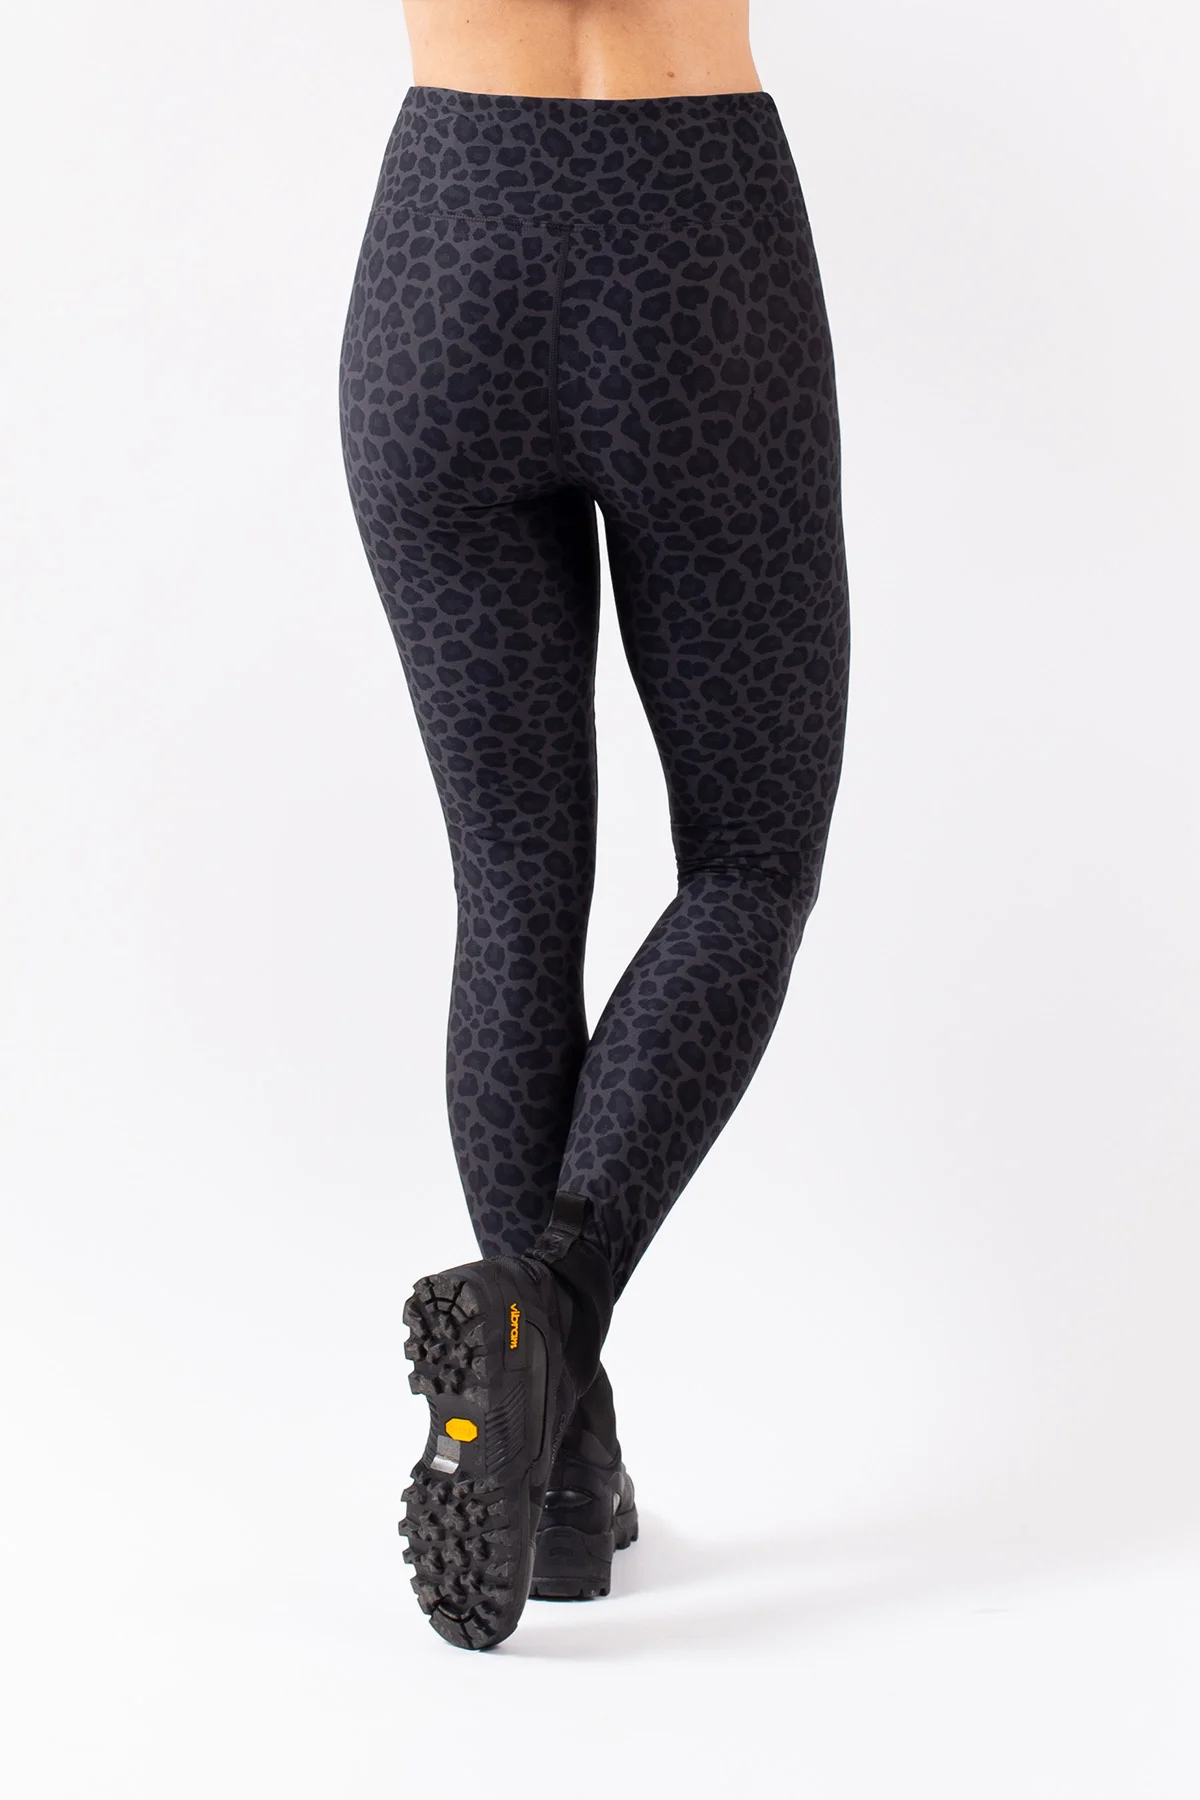 Icecold Tights - Black Leopard | S